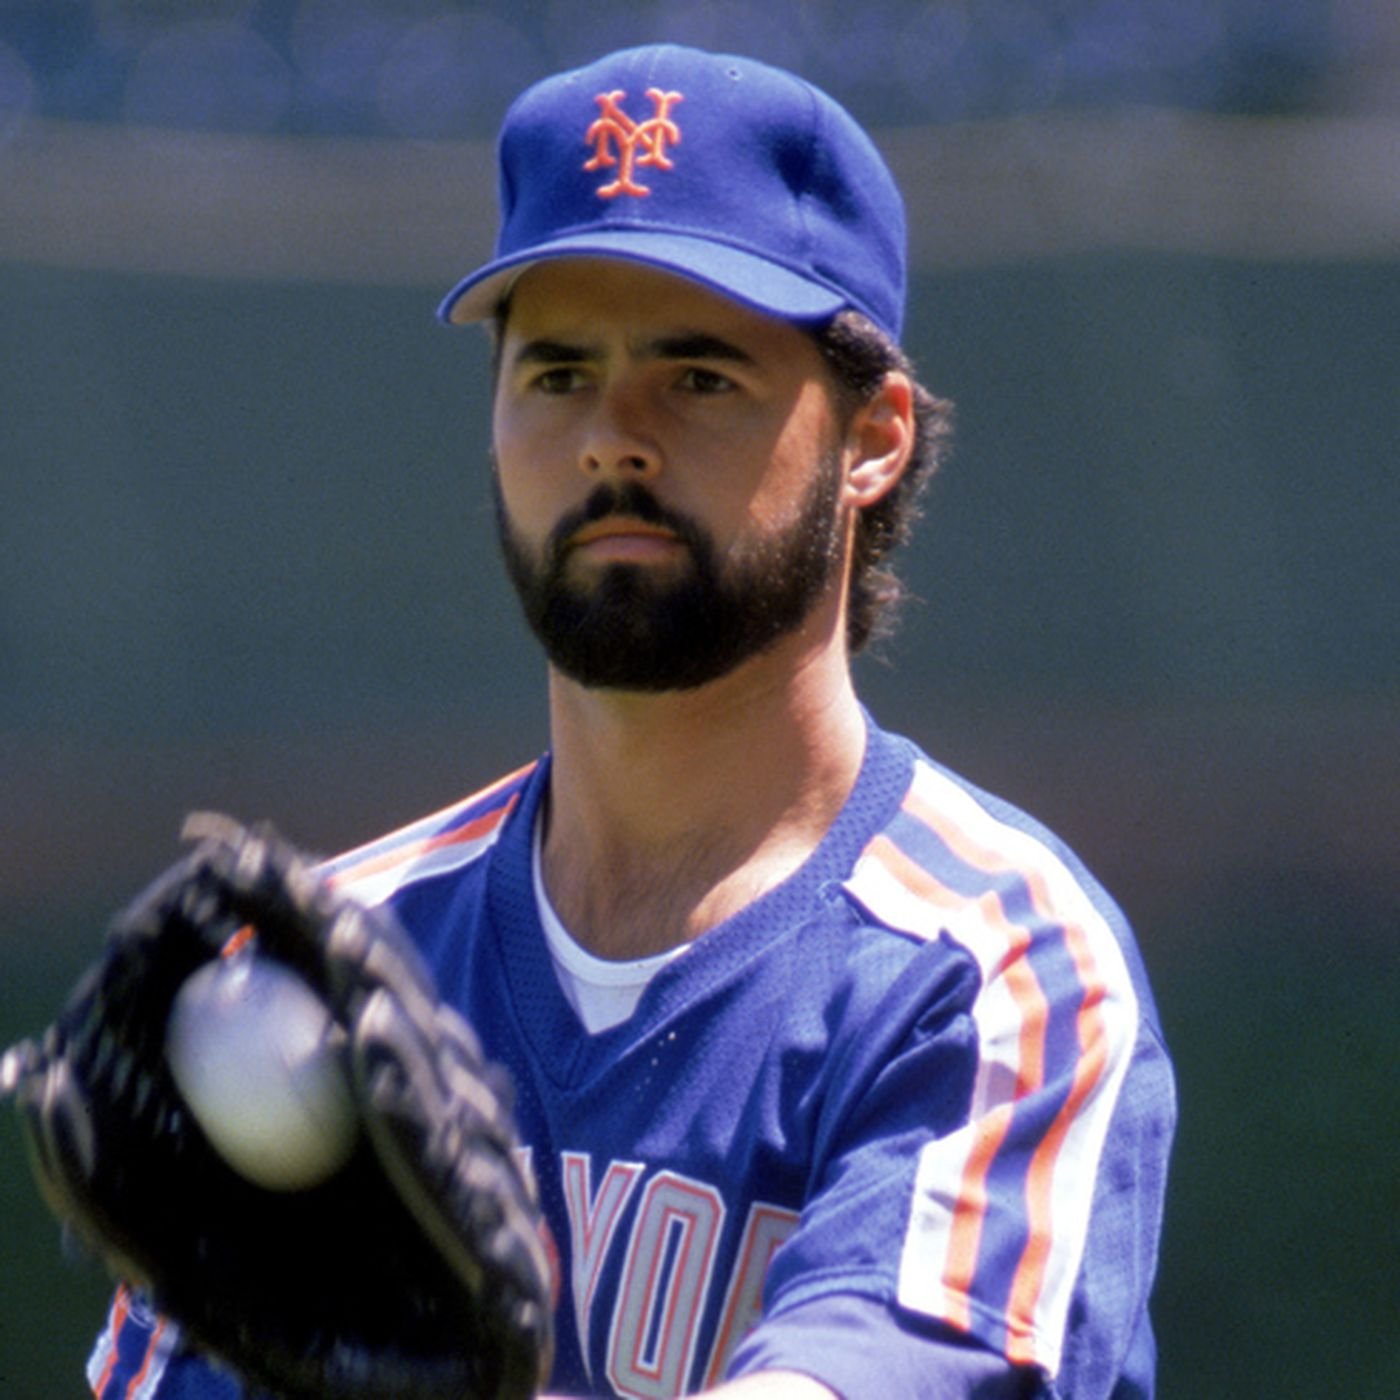 Happy birthday to Rick Aguilera, who won World Series rings with the Mets and the Twins 